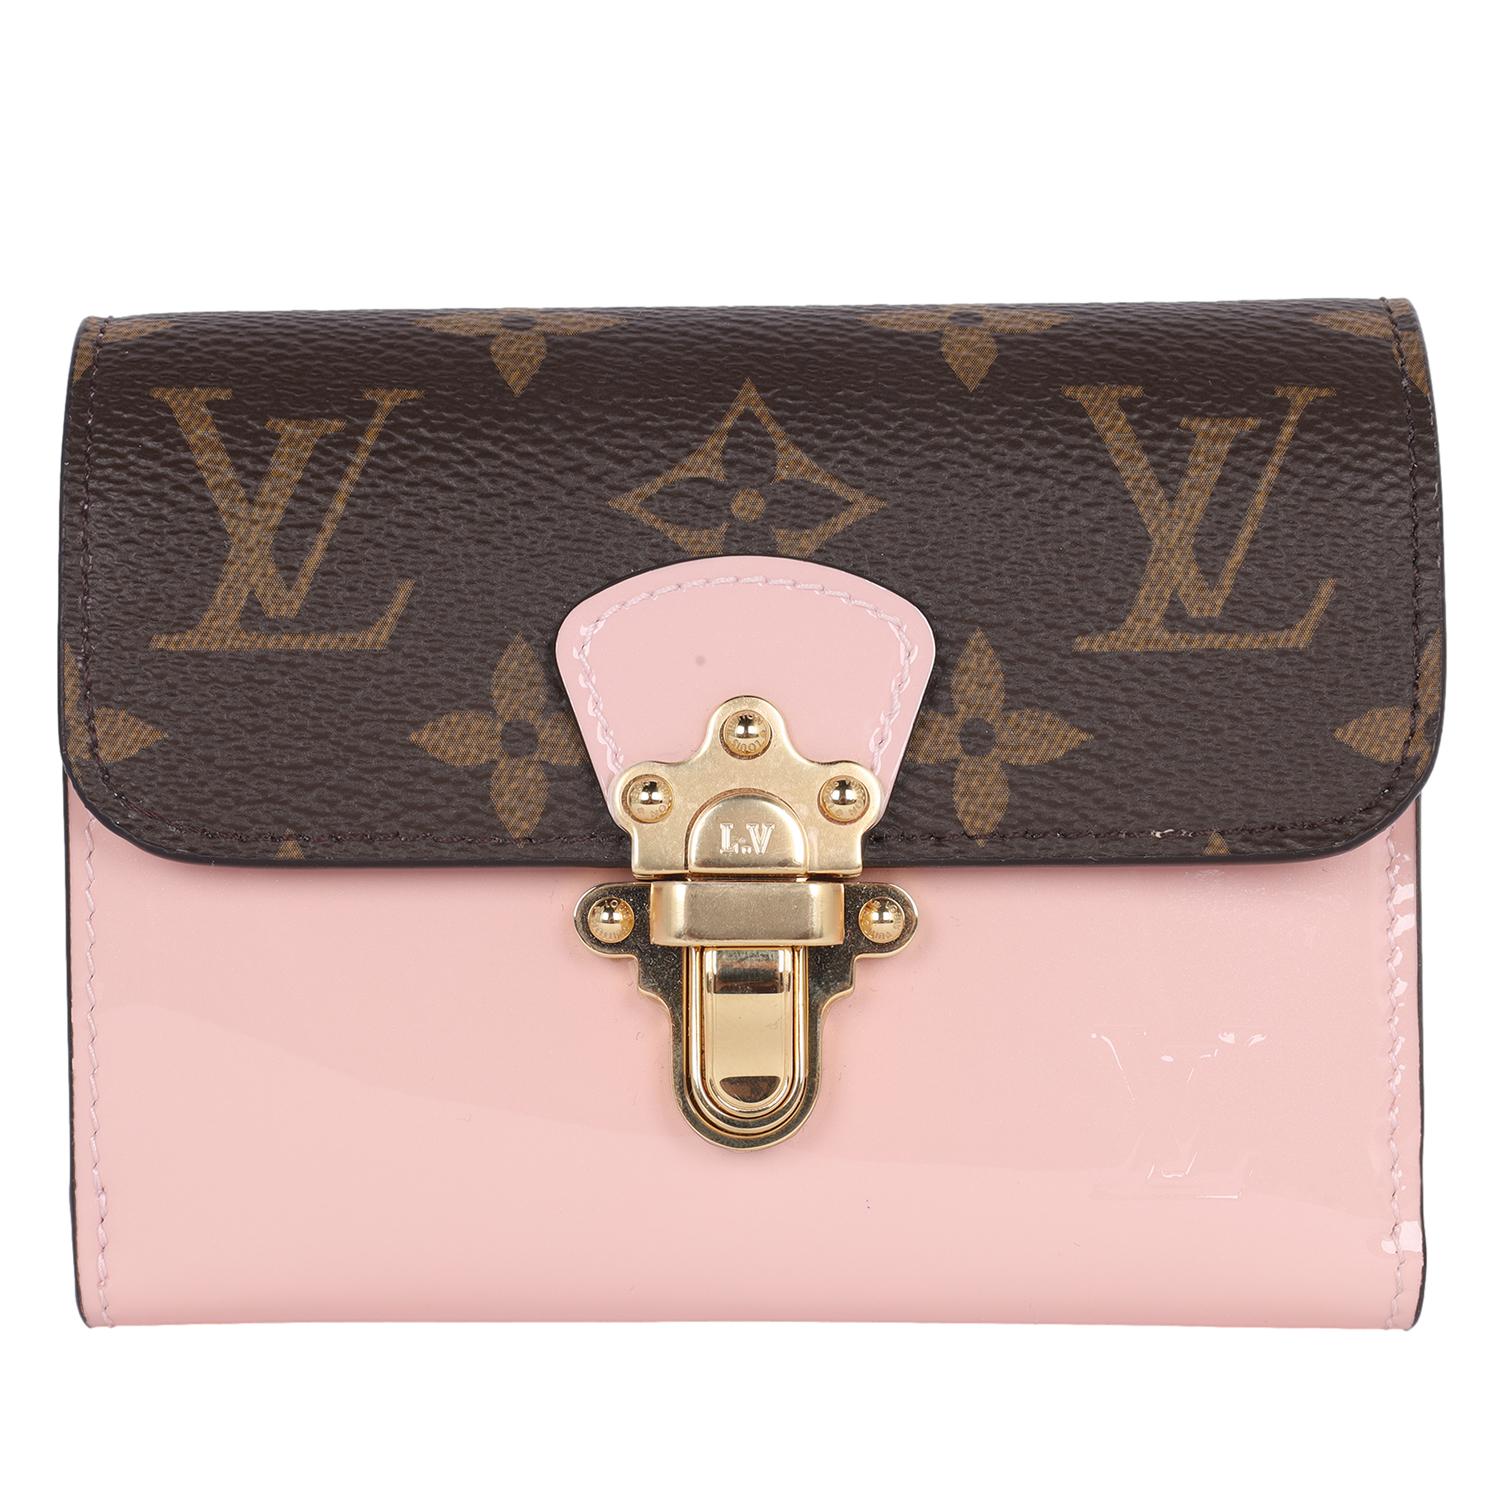 Authentic Louis Vuitton Patent Calfskin Monogram Cherrywood Compact Wallet Rose Ballerine Pink. This classic wallet features traditional monogram coated canvas and light pink patent leather. The front flap has a polished brass push lock. The front